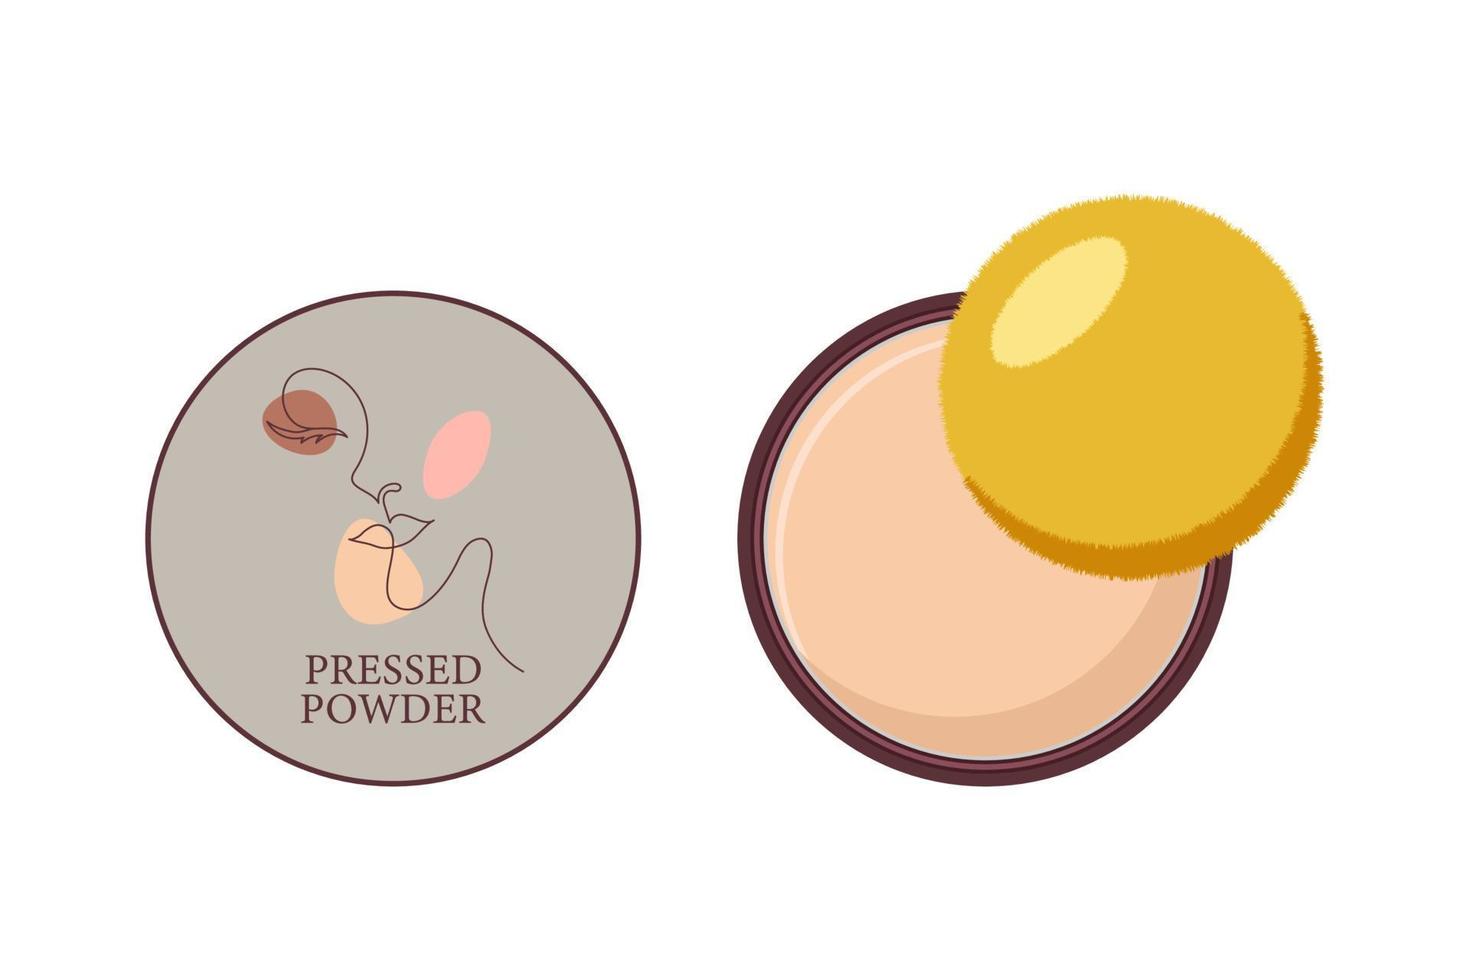 Compact pressed powder and sponge on a white background. vector illustration